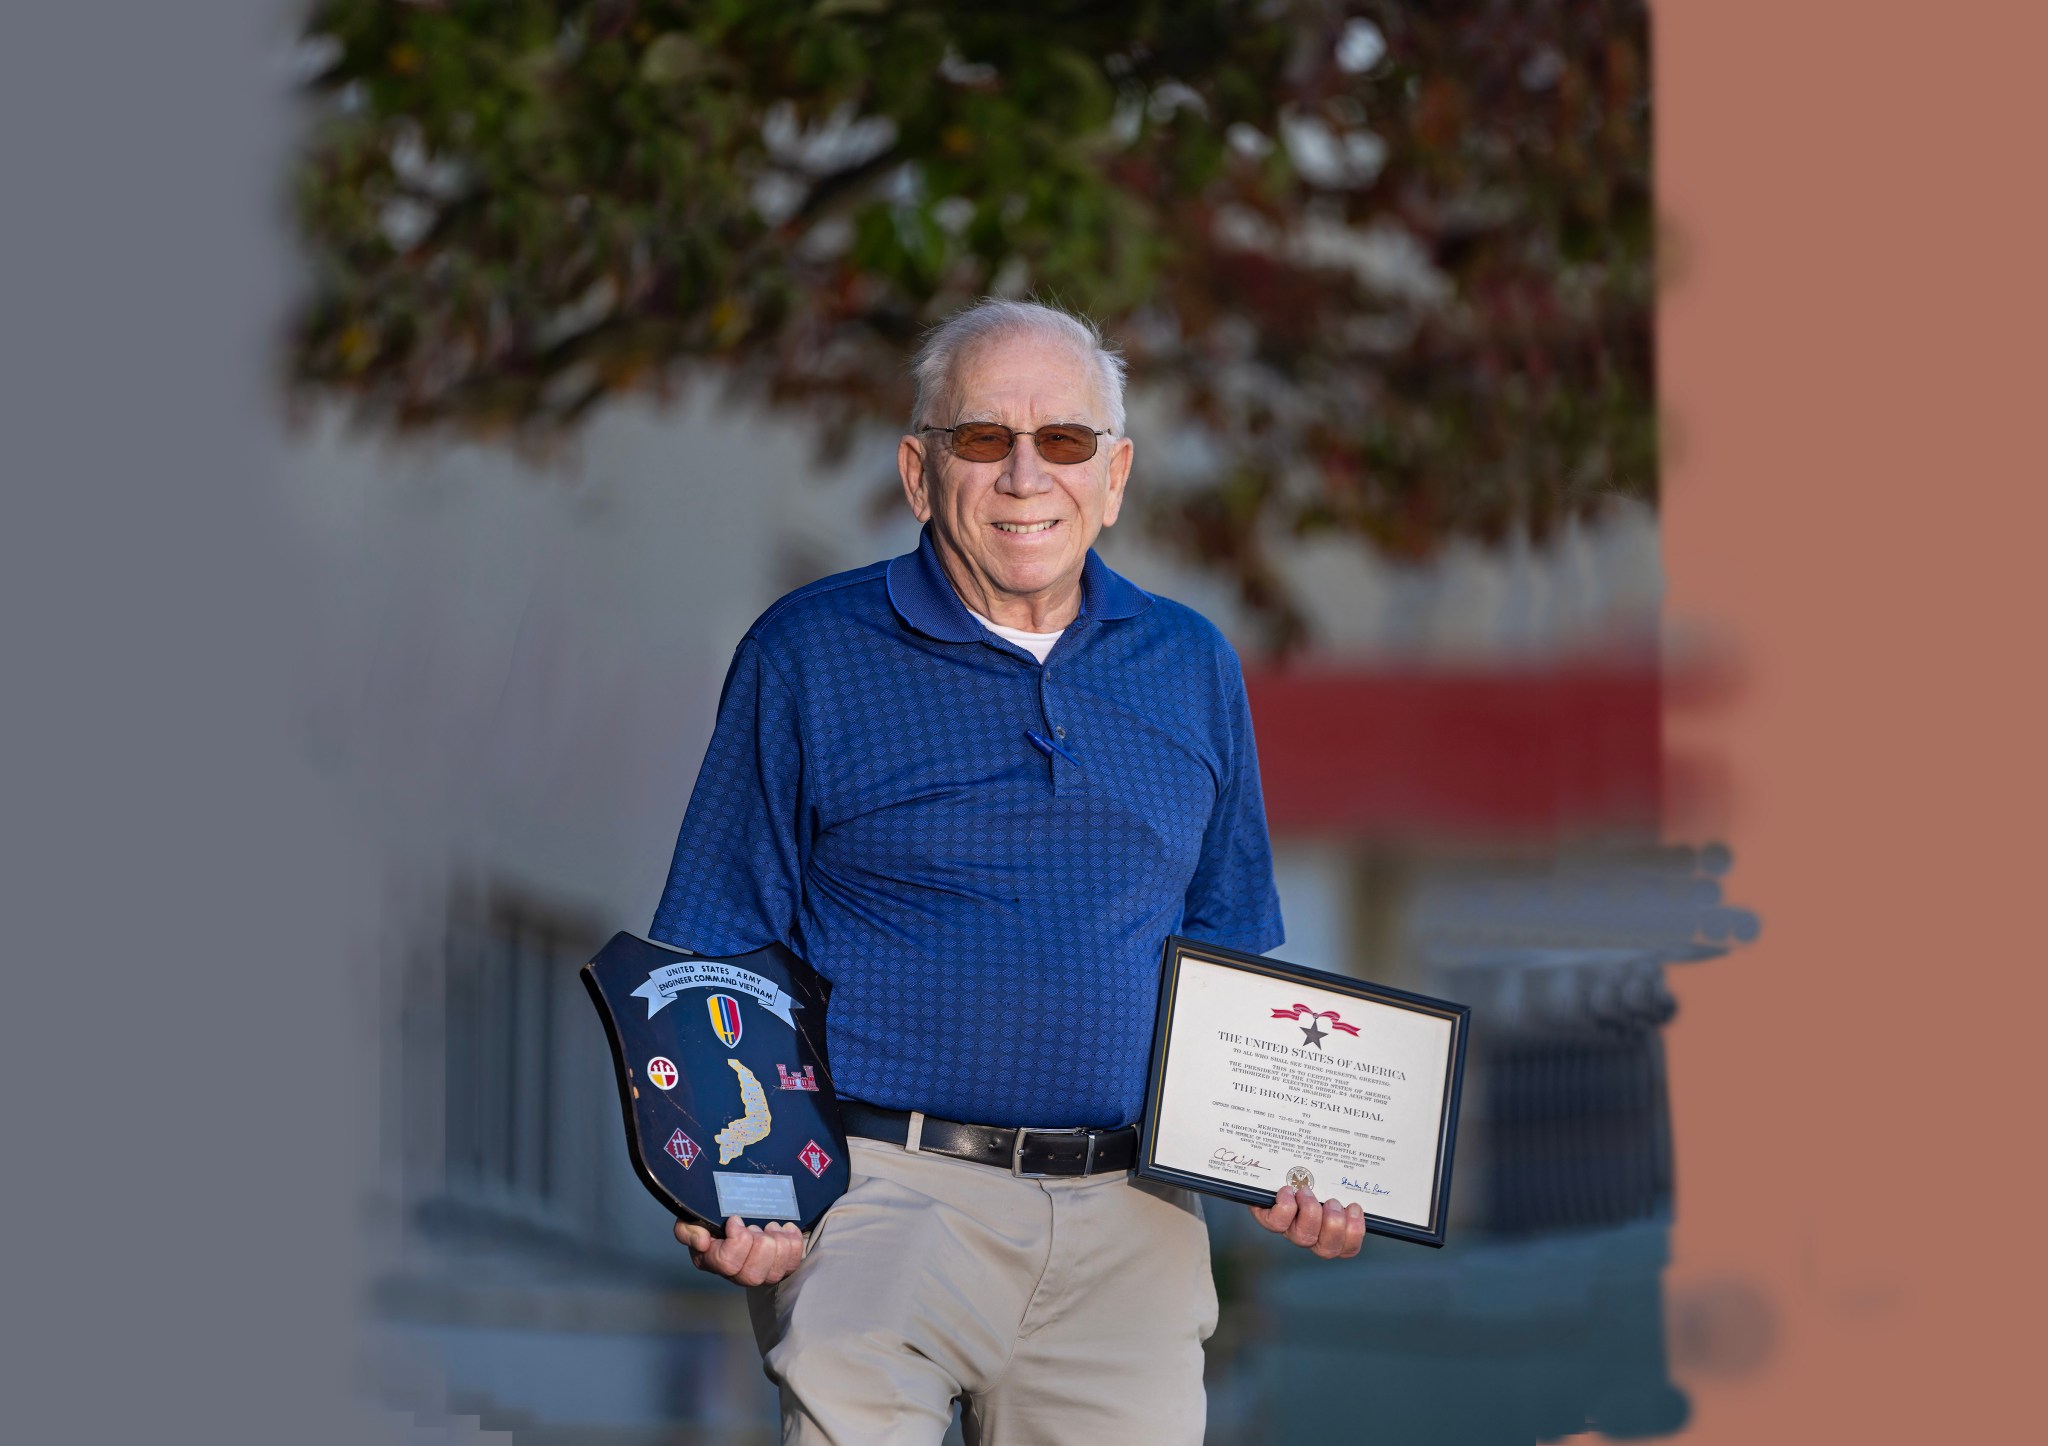 An older white man stands in front of a tree holding two plaques.